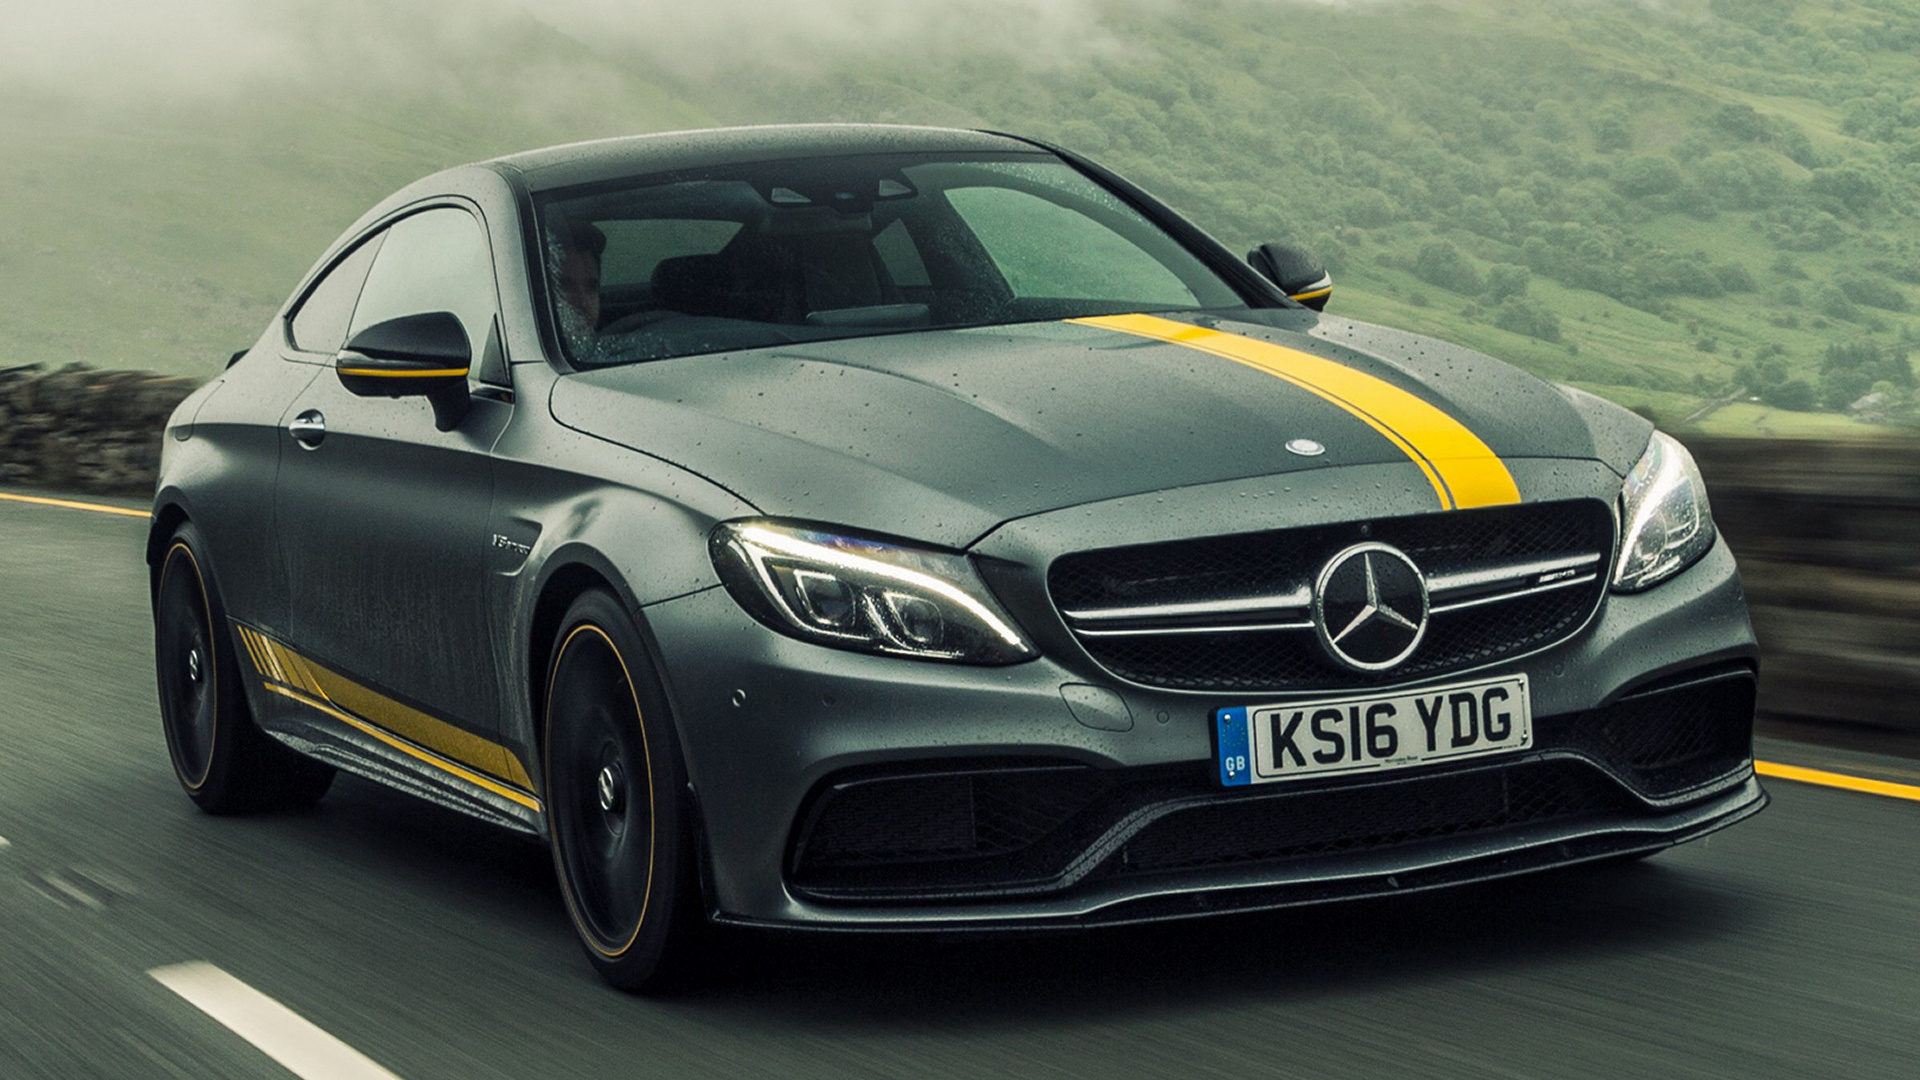 Mercedes AMG C 63 S Coupe Edition 1 2016 UK Wallpapers